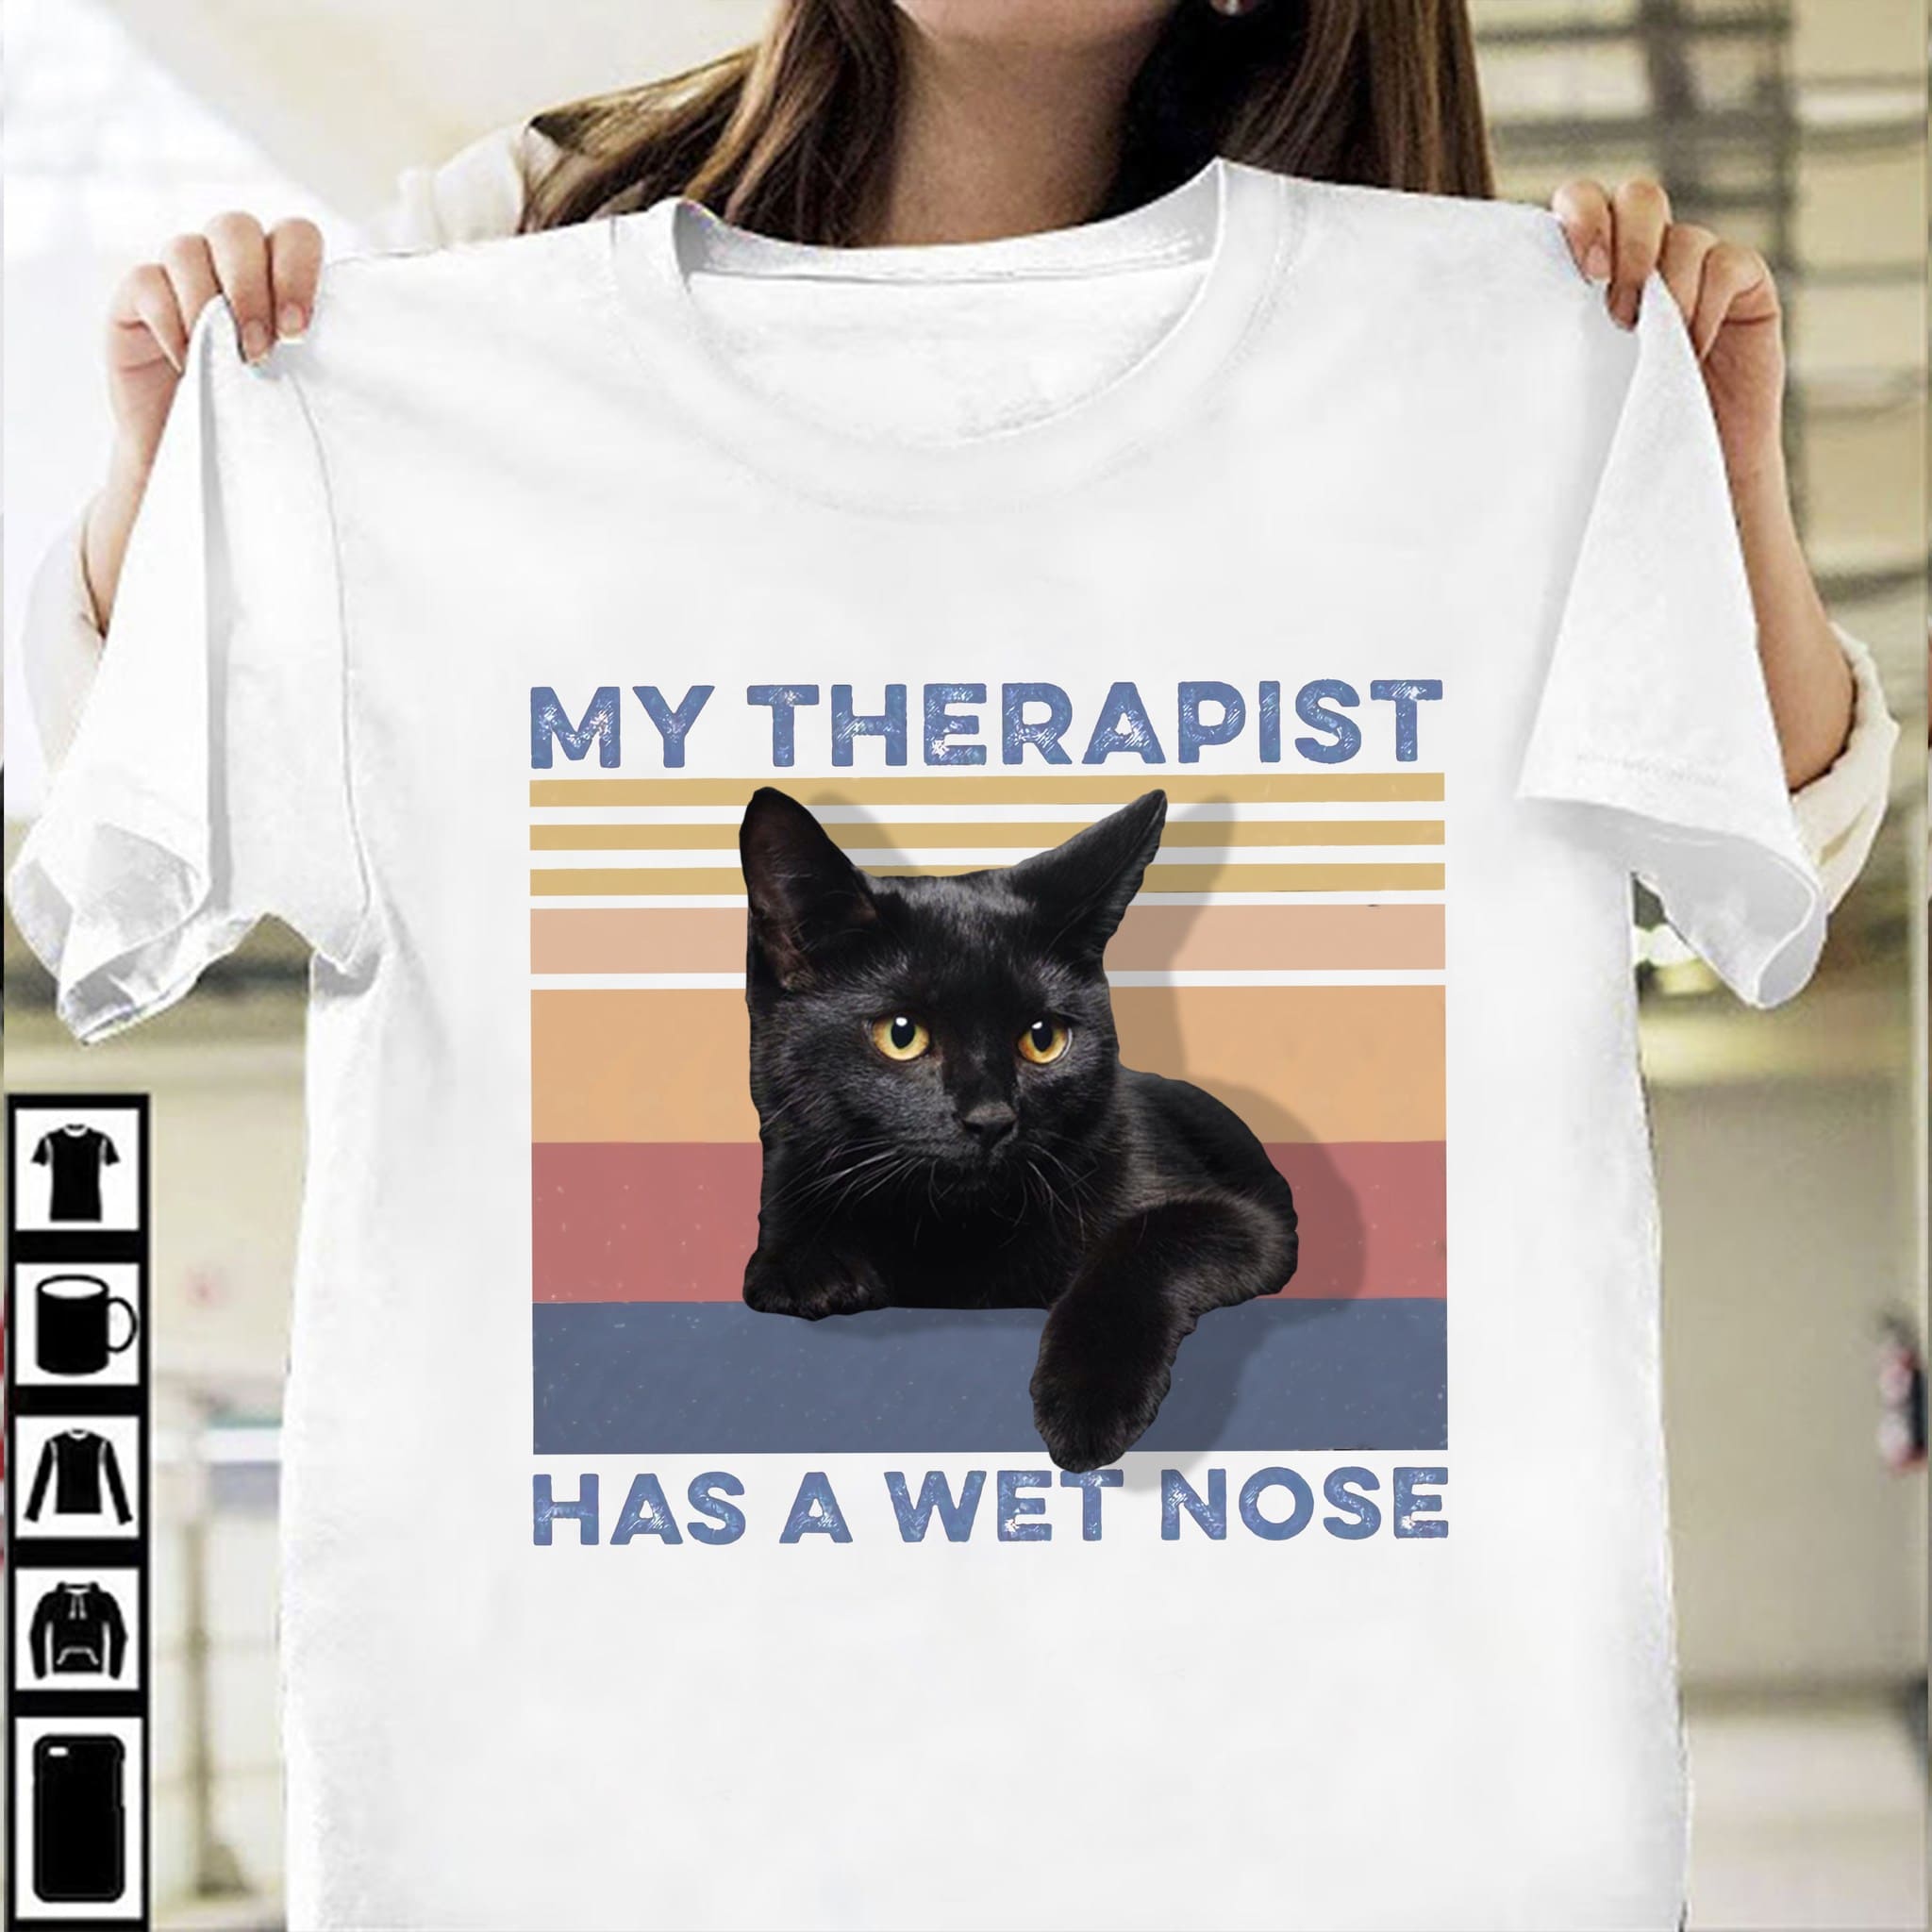 My therapist has a wet nose - Black cat wet nose, black cat my therapist